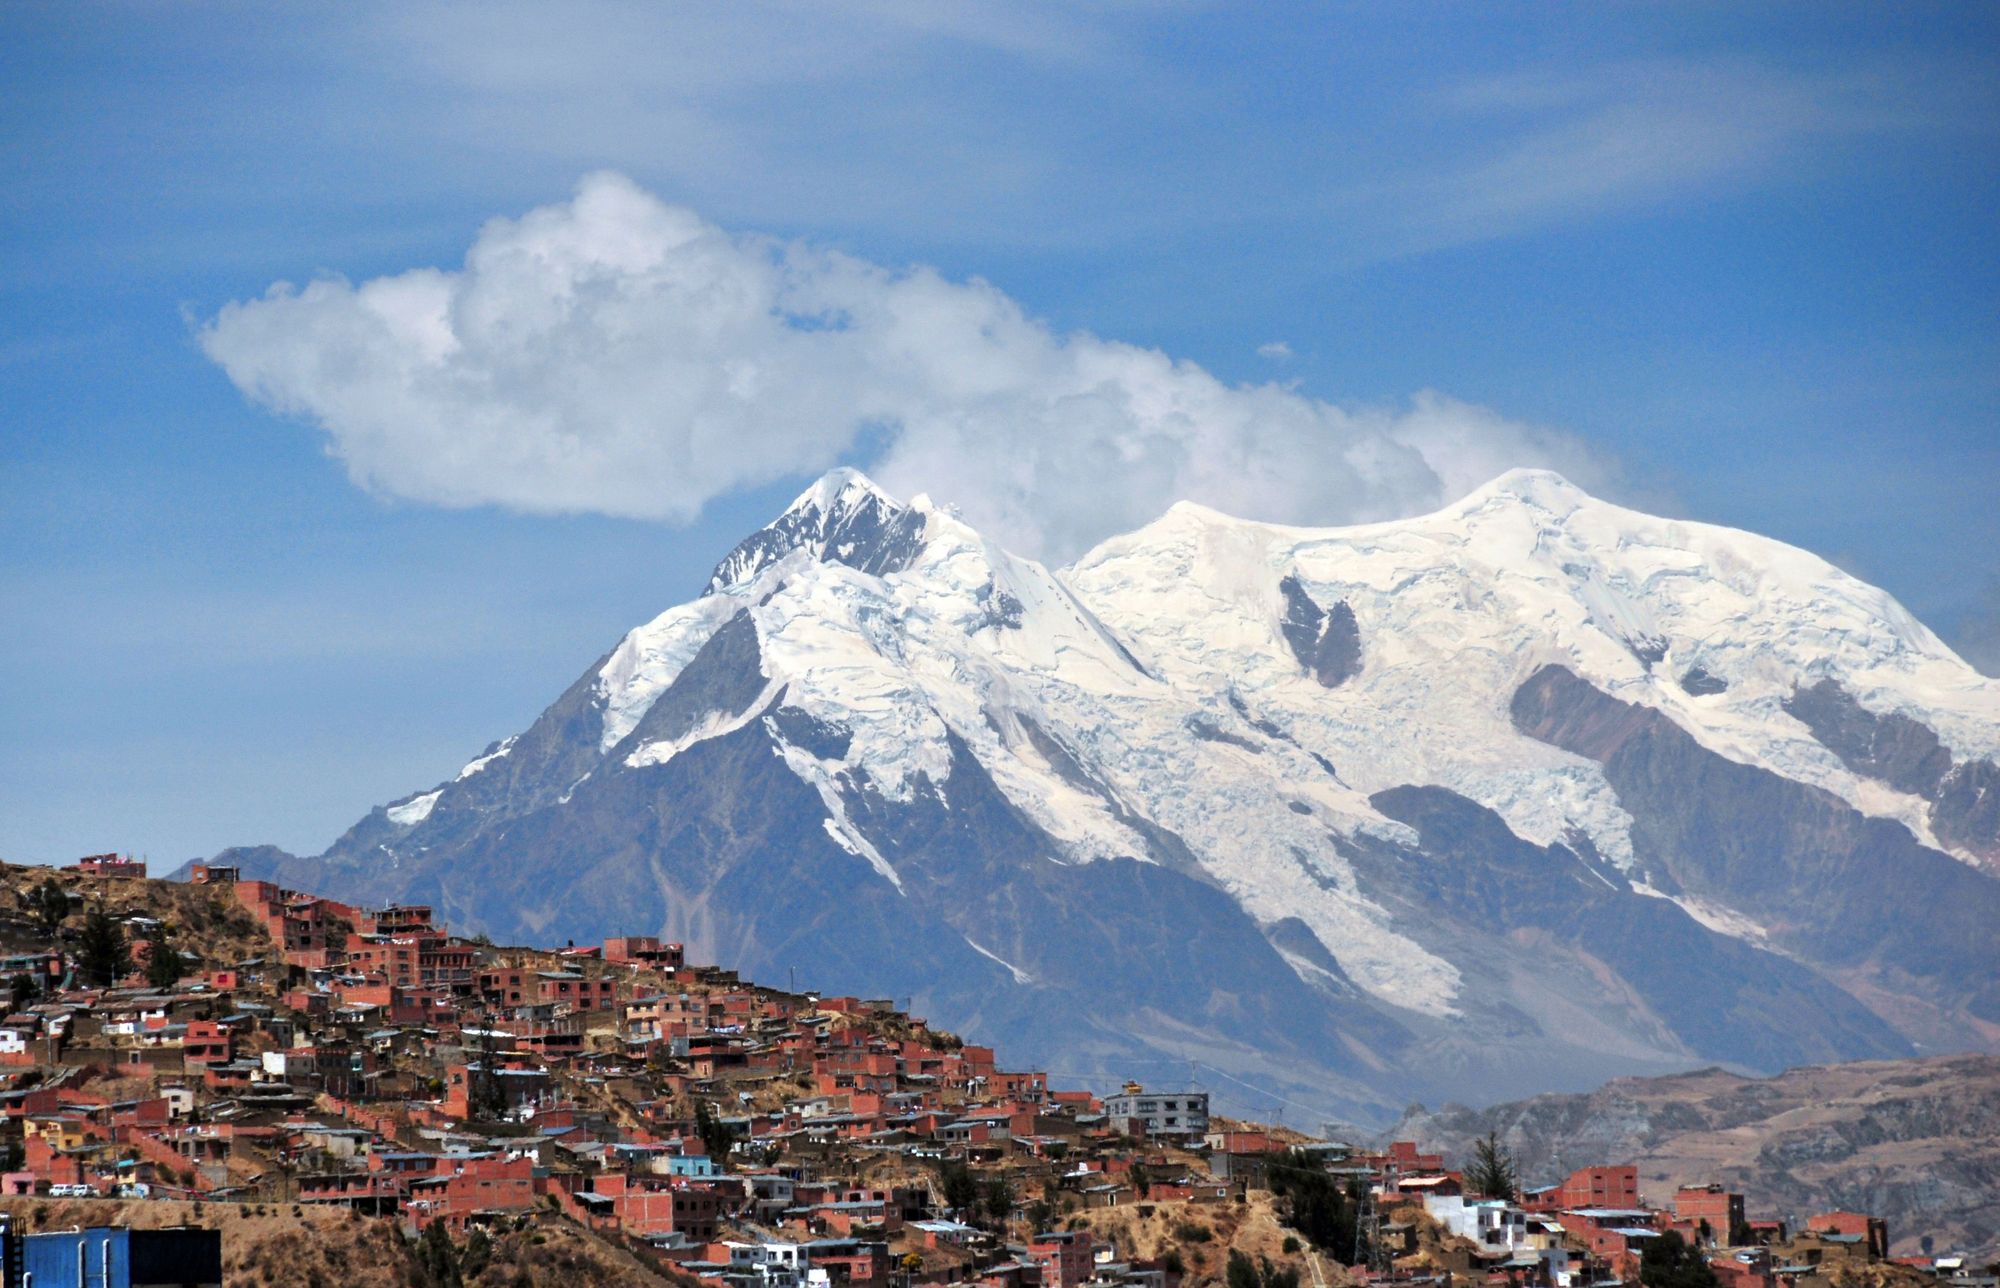 The southern suburbs of La Paz, the higest capital city in the world, with Bolivia's biggest mountain, La Paz, Ilimani, behind. Photo: Getty